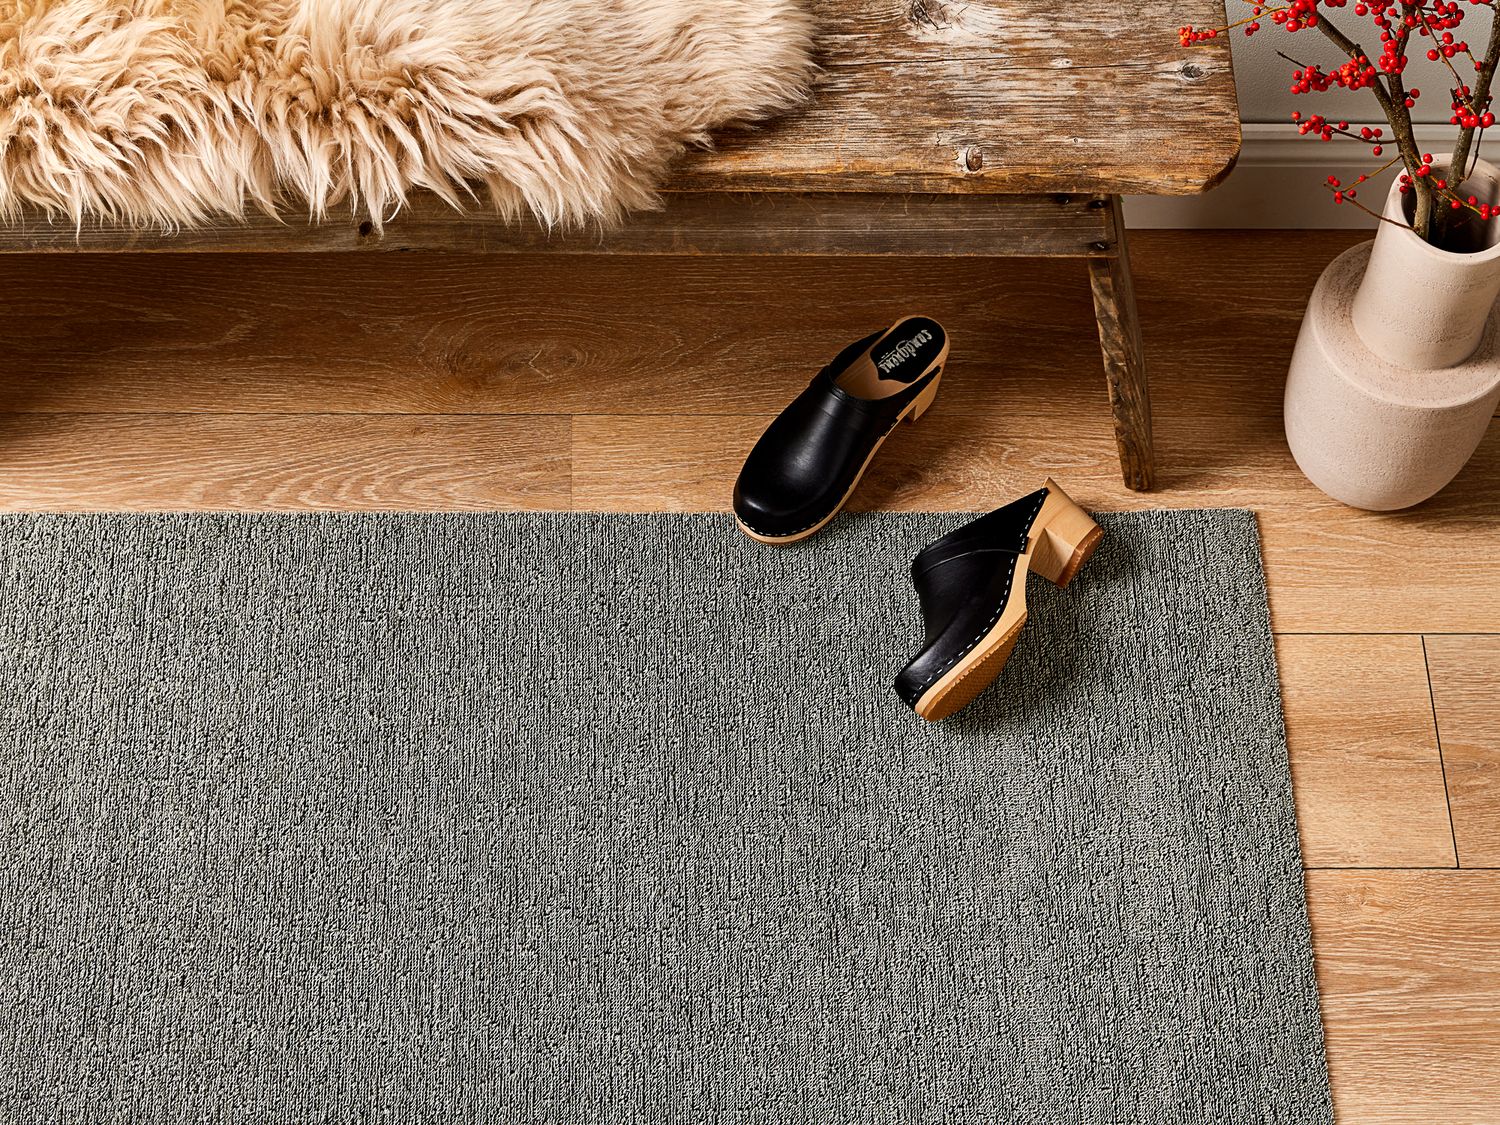 Shop Solid Indoor/Outdoor Shag Mat by Chilewich